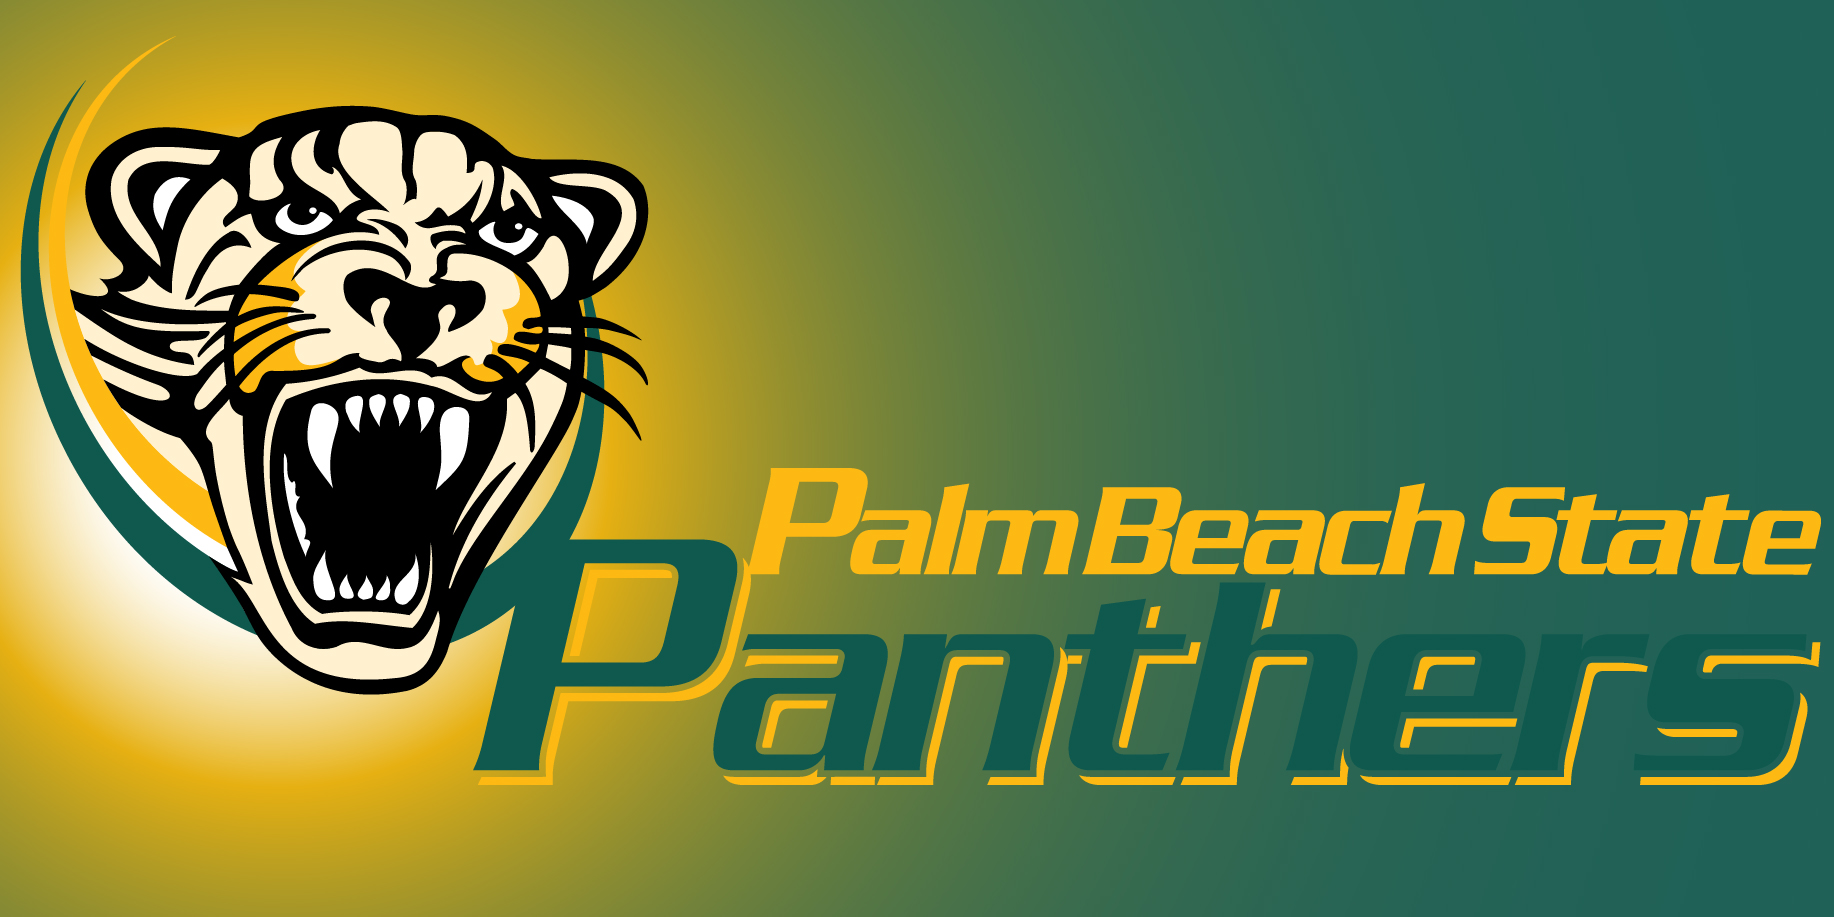 PBSC Athletics Adding Women's Soccer in 2021, Will Discontinue Softball in 2020